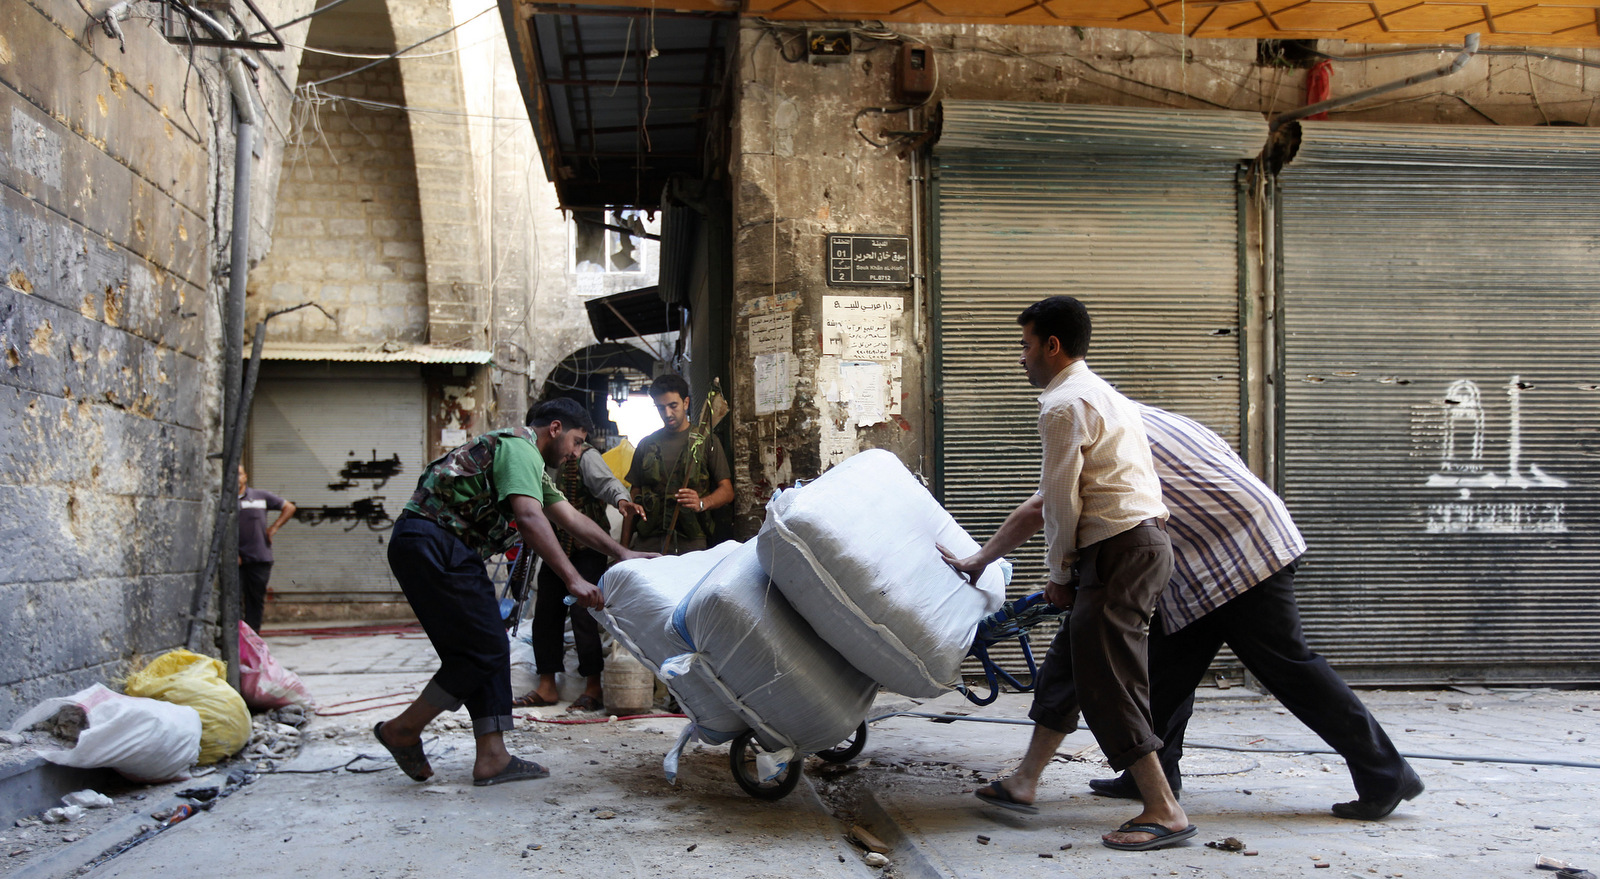 A Free Syrian Army fighter moves supplies at the souk of the old city of Aleppo city, Syria, September 24, 2012. The Arabic on the closed shop at right reads: "Aleppo." (AP/Hussein Malla)